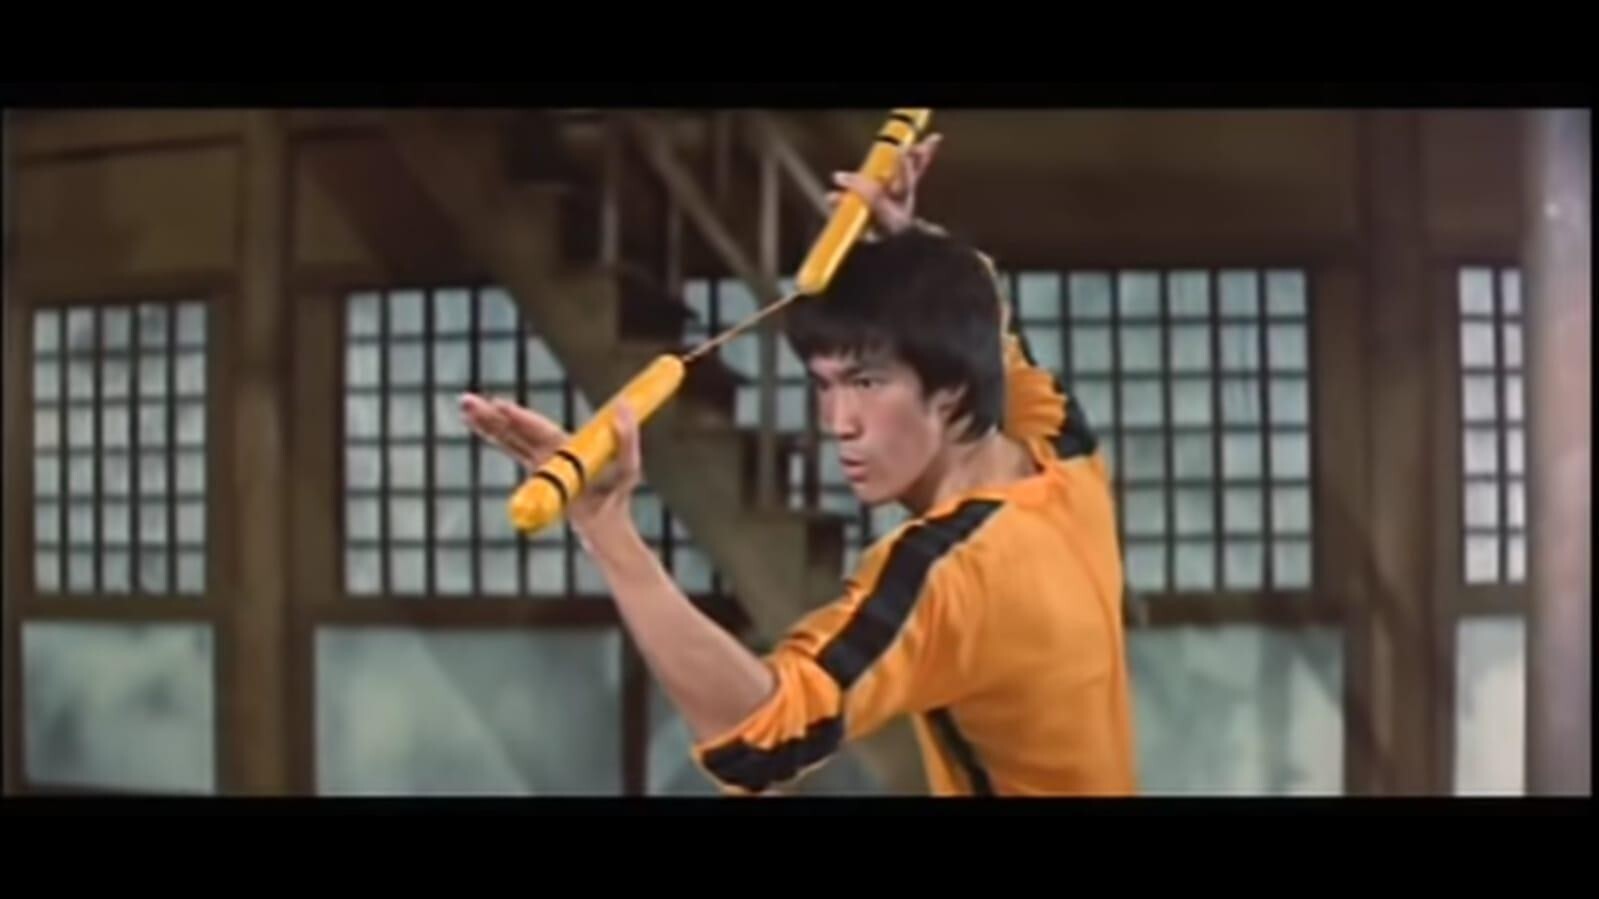 Bruce Lee’s classic yellow jumpsuit from Game of Death has been endlessly riffed on in pop culture – and has now inspired a new dish at Hong Kong’s Bo Innovation. Photo: YouTube